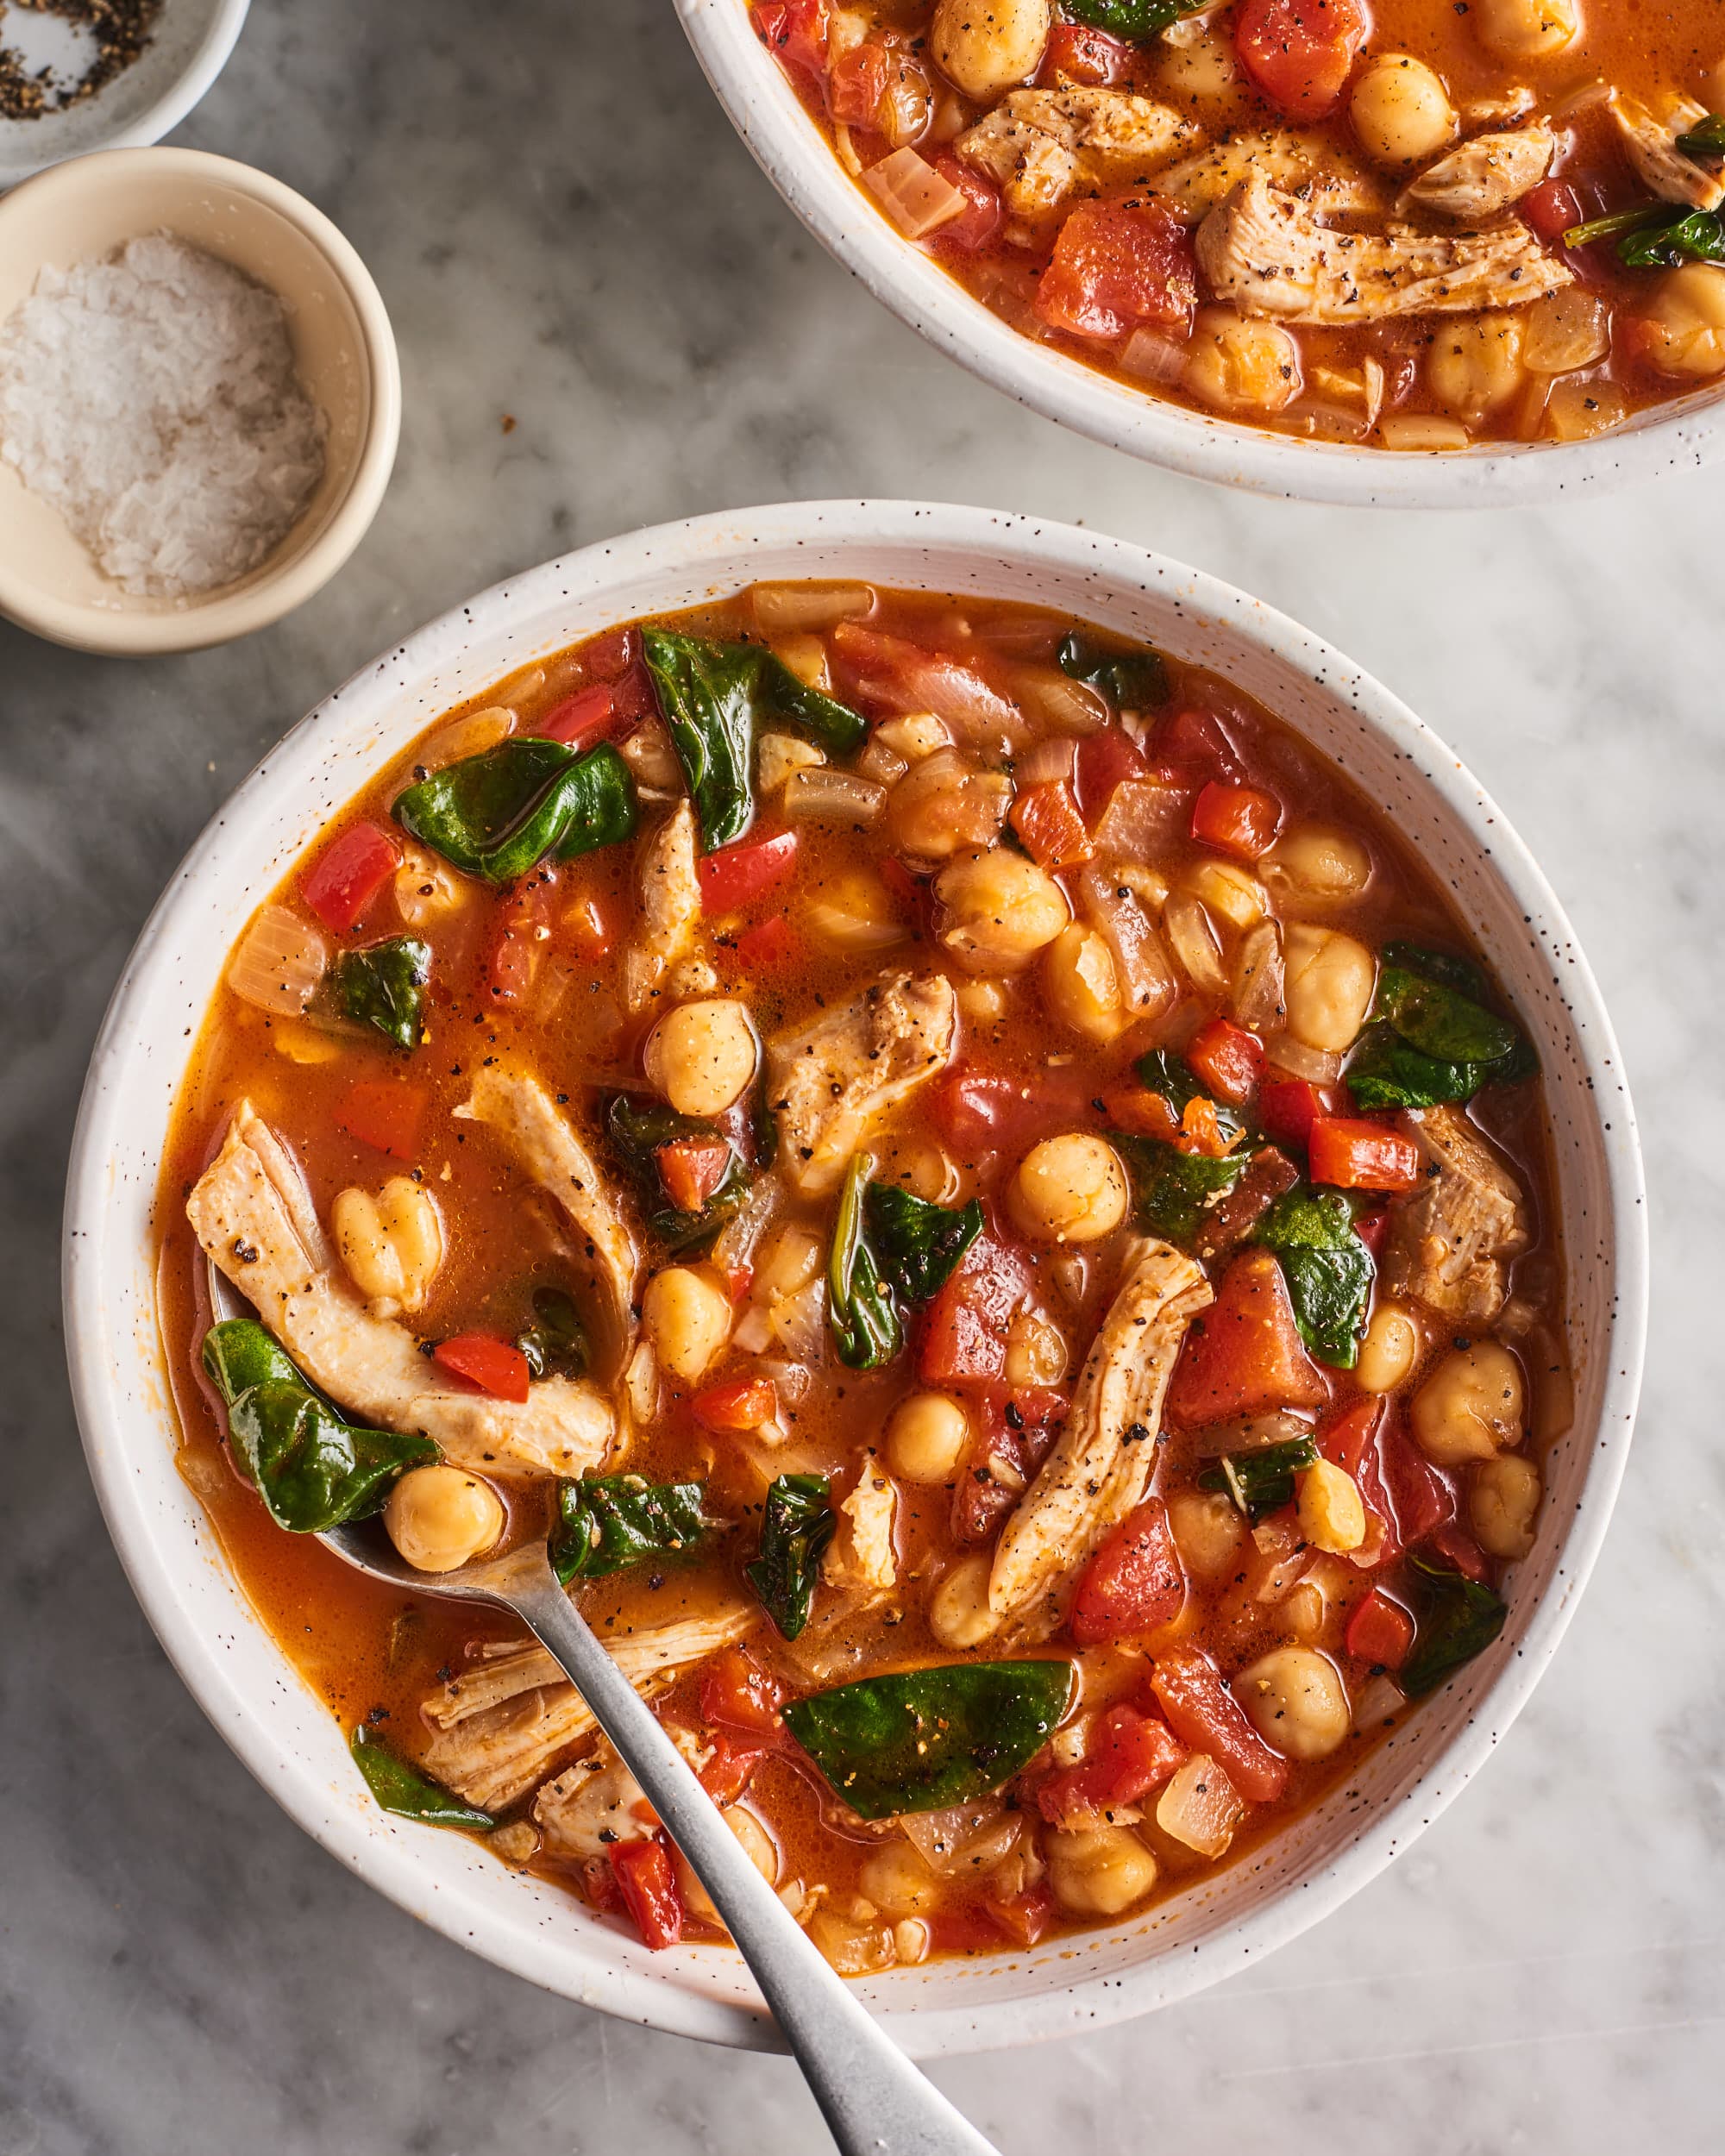 https://cdn.apartmenttherapy.info/image/upload/v1583529935/k/Photo/Recipes/2020-03-Mediterranean-Chickpea-and-Chicken-Soup/Mediterranean-Chickpea-and-Chicken-Soup_008.jpg